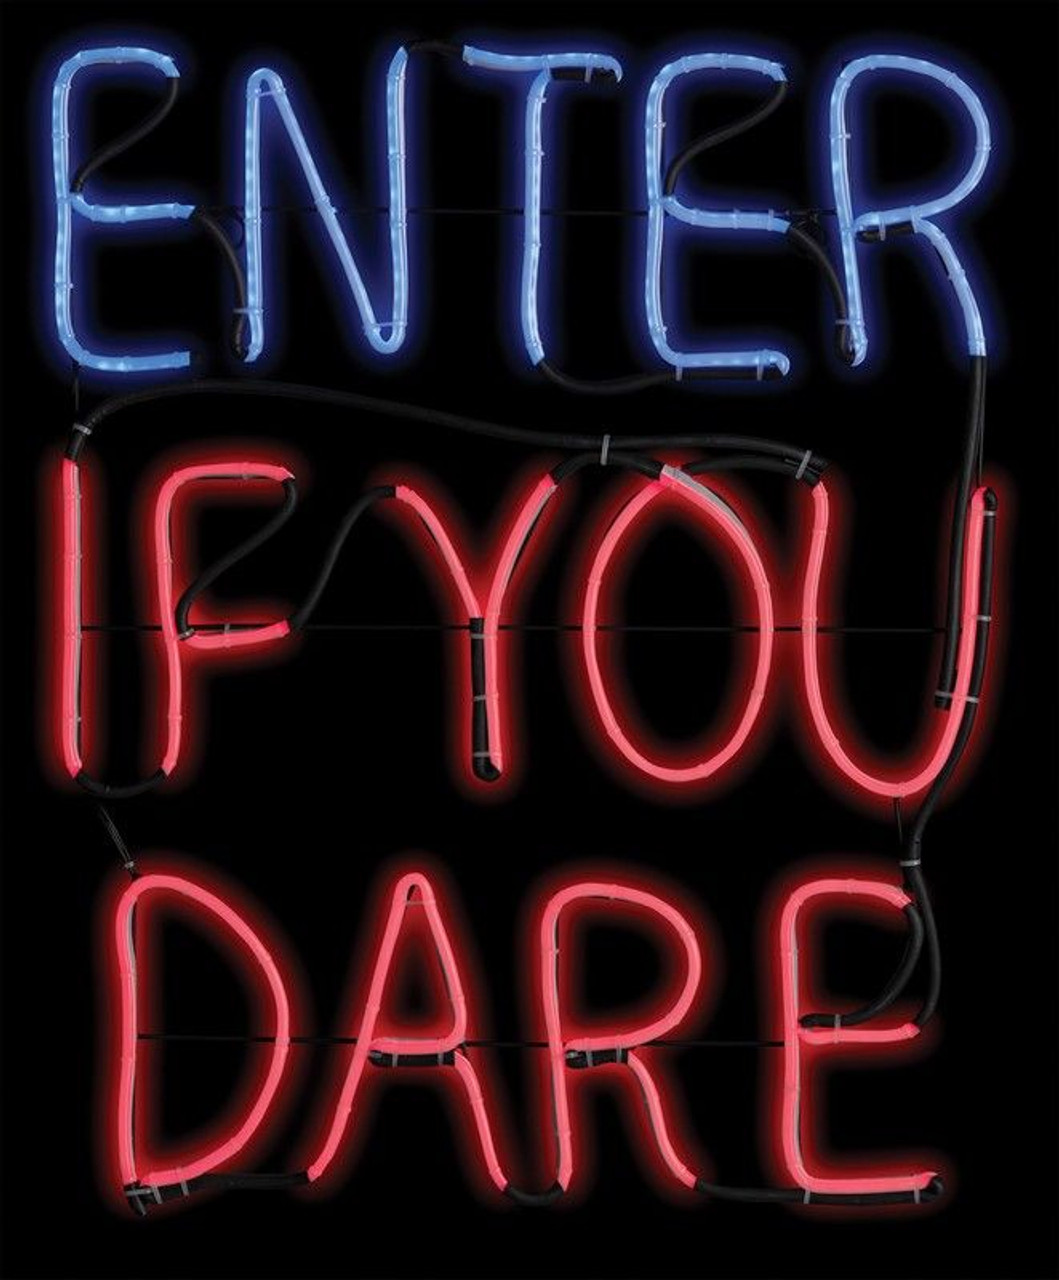 Enter If You Dare "Light Glo" LED Neon Sign